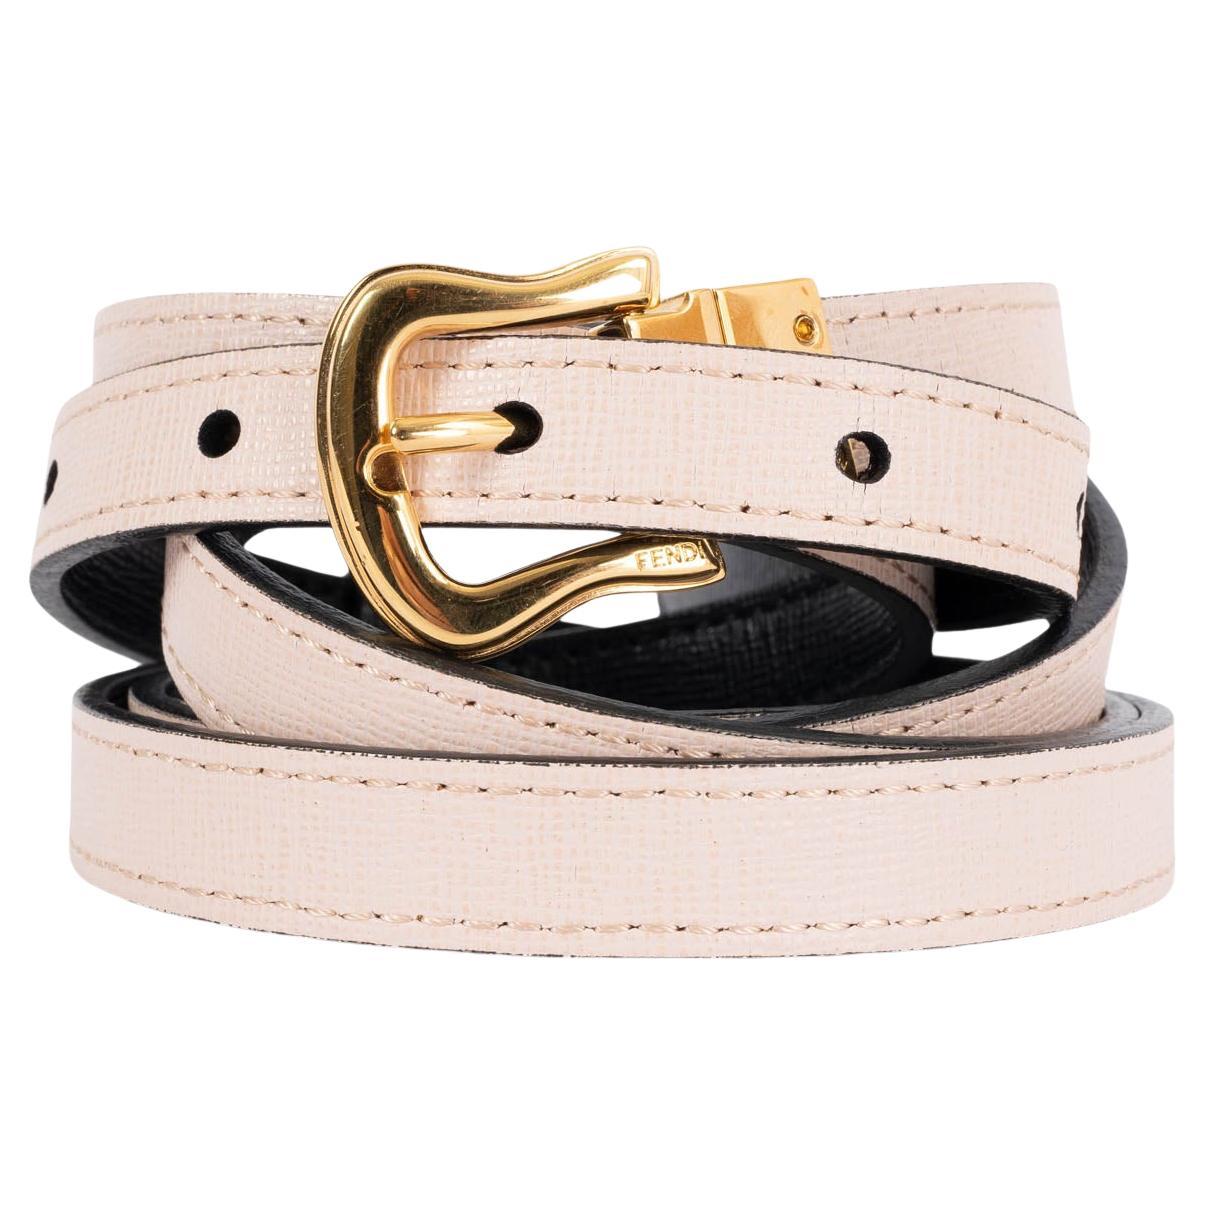 How do you know if a Fendi belt is real?